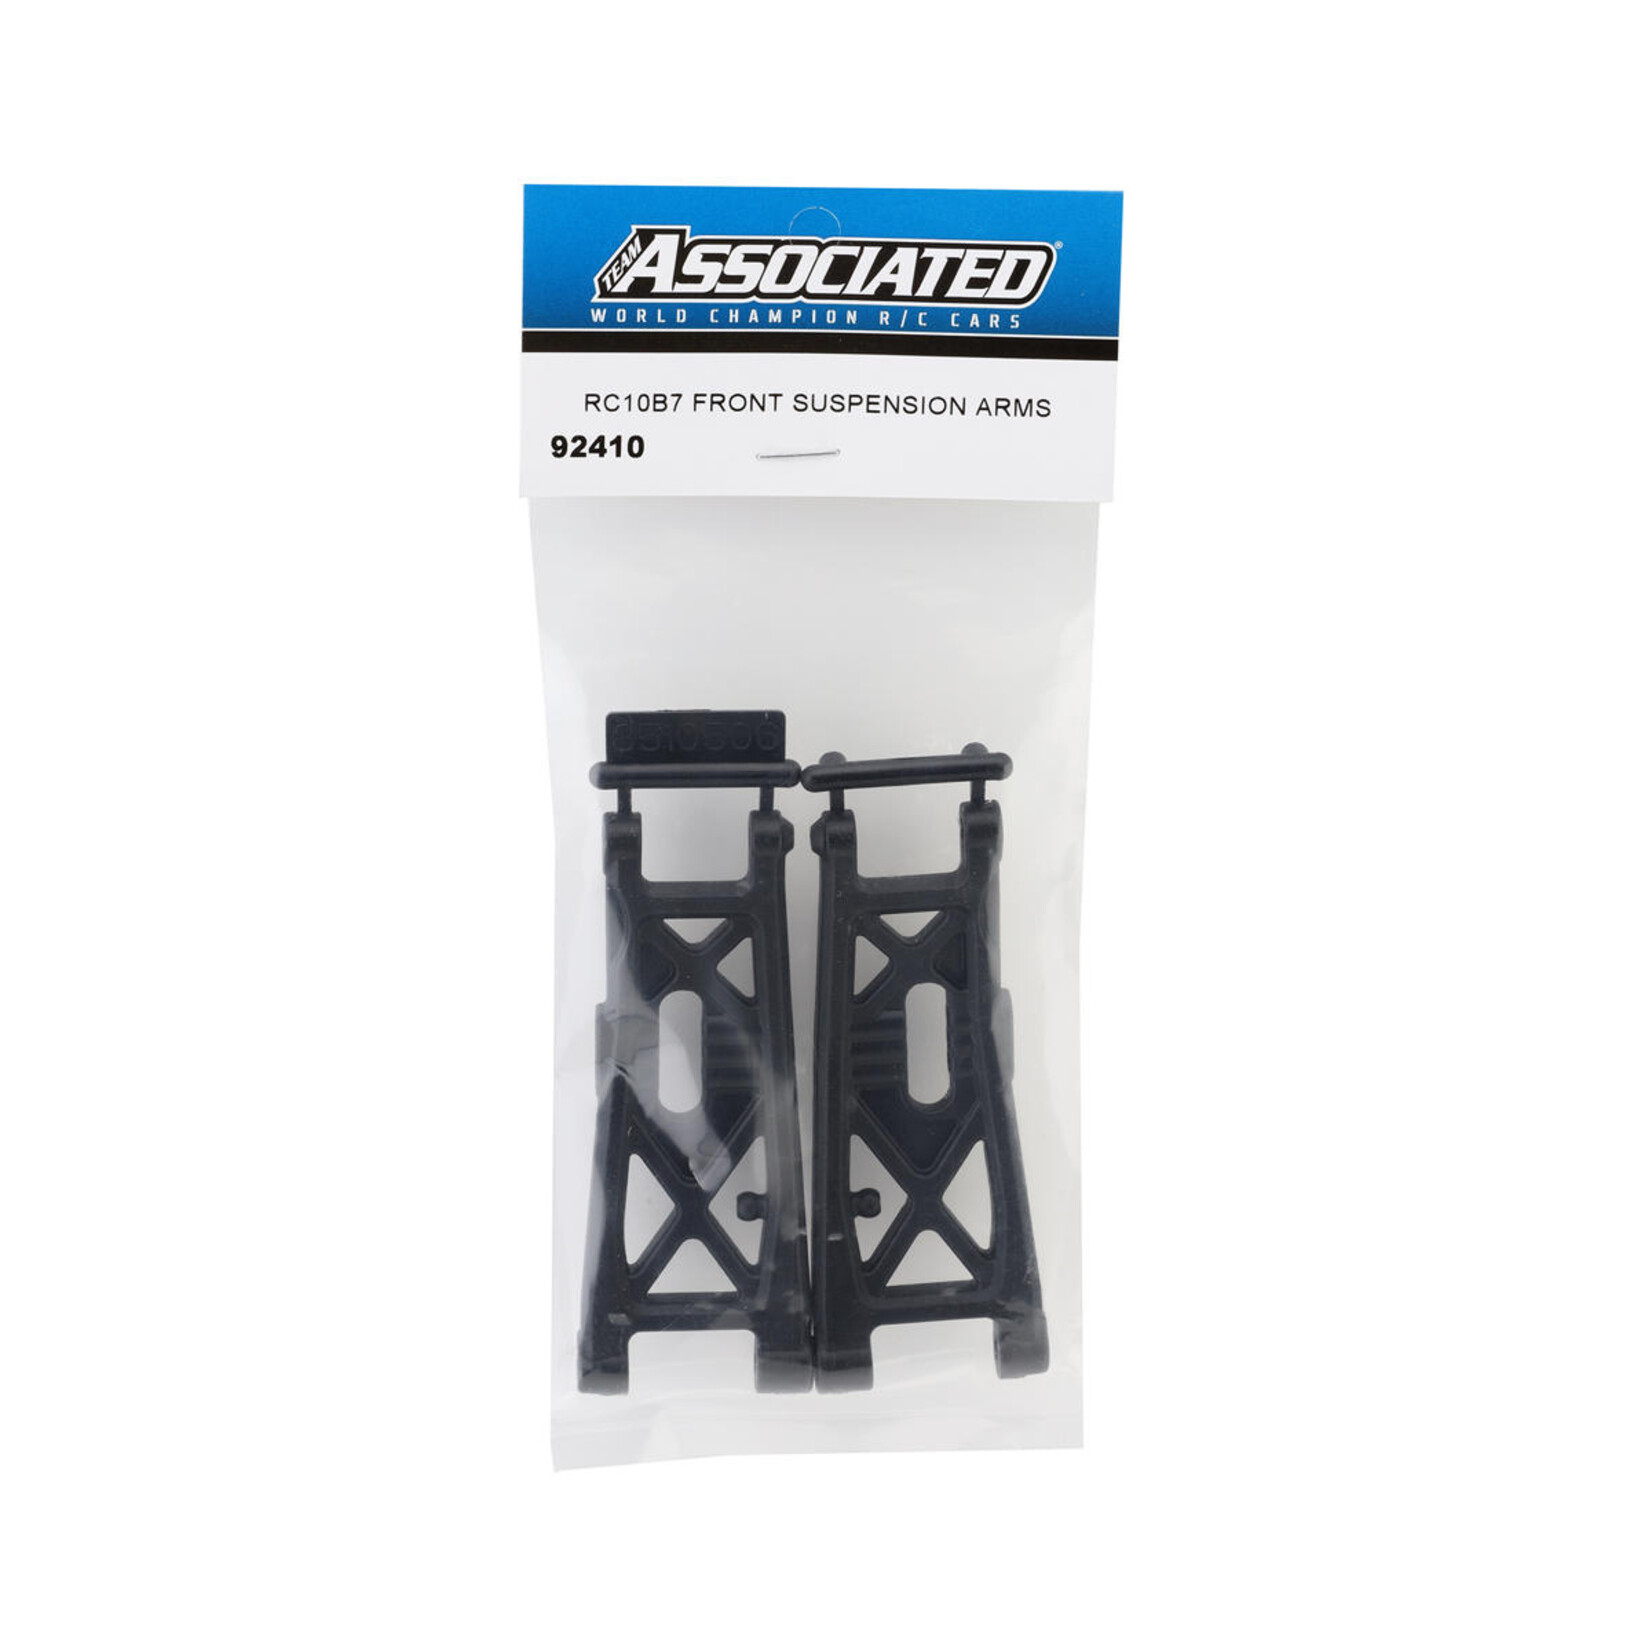 Team Associated Team Associated RC10B7 Front Suspension Arms (2) #92410